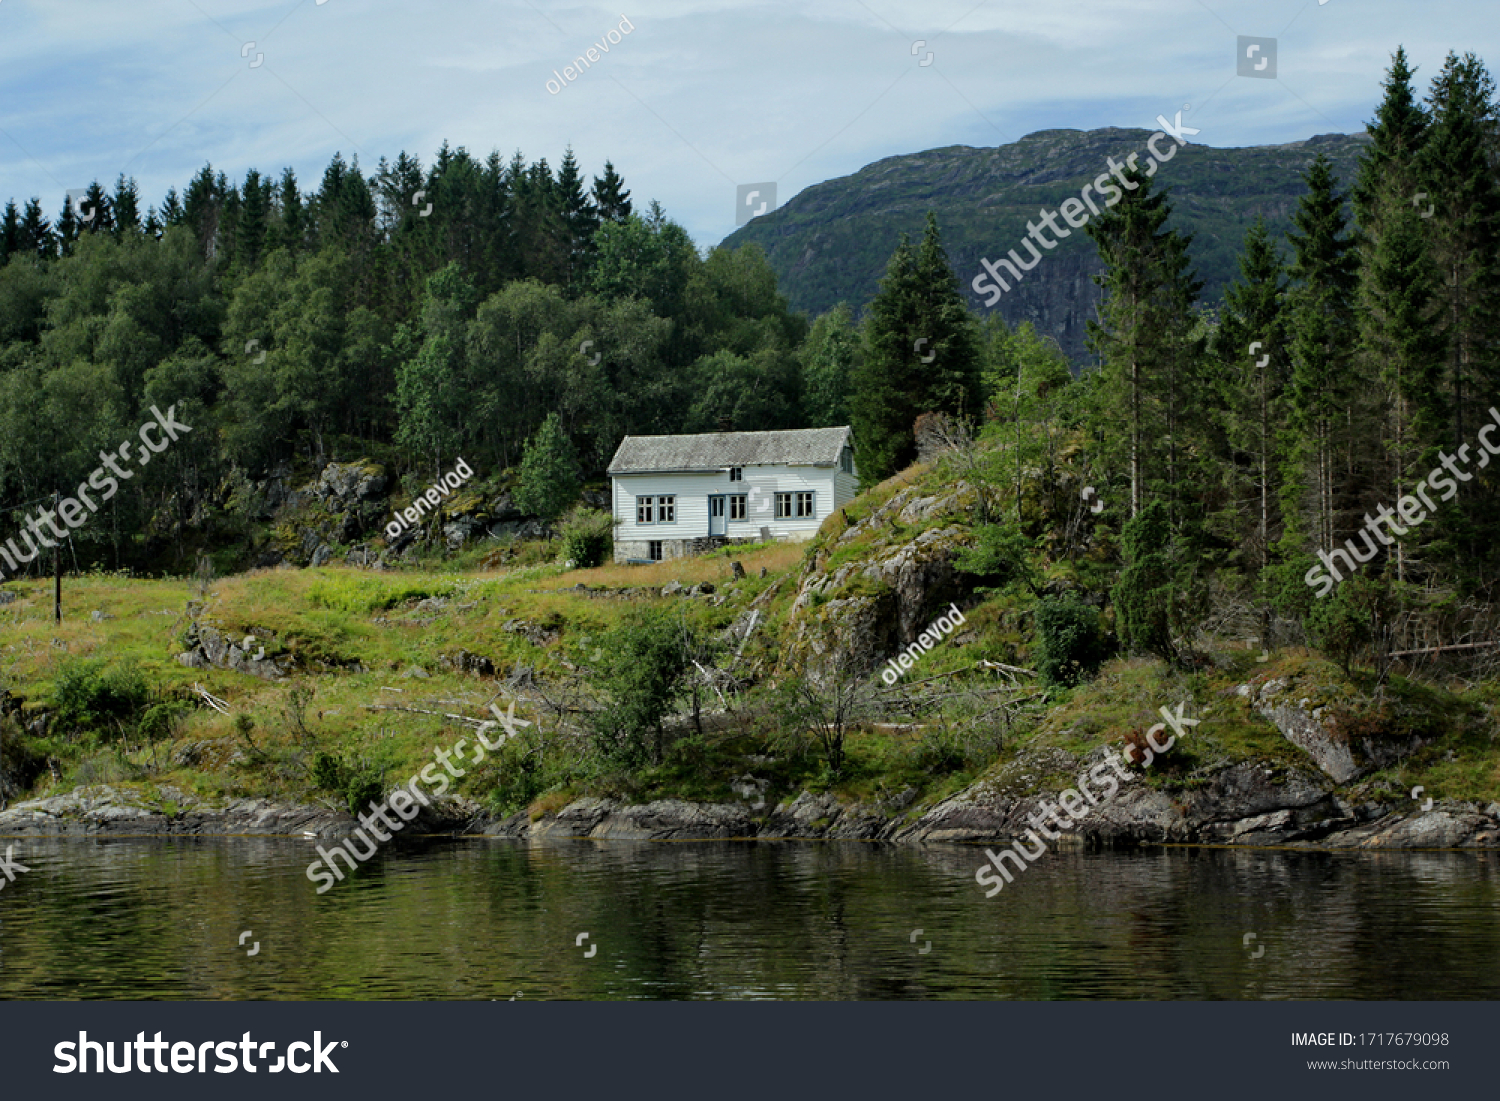 White house on the shore of Eidfjord, Norway #1717679098